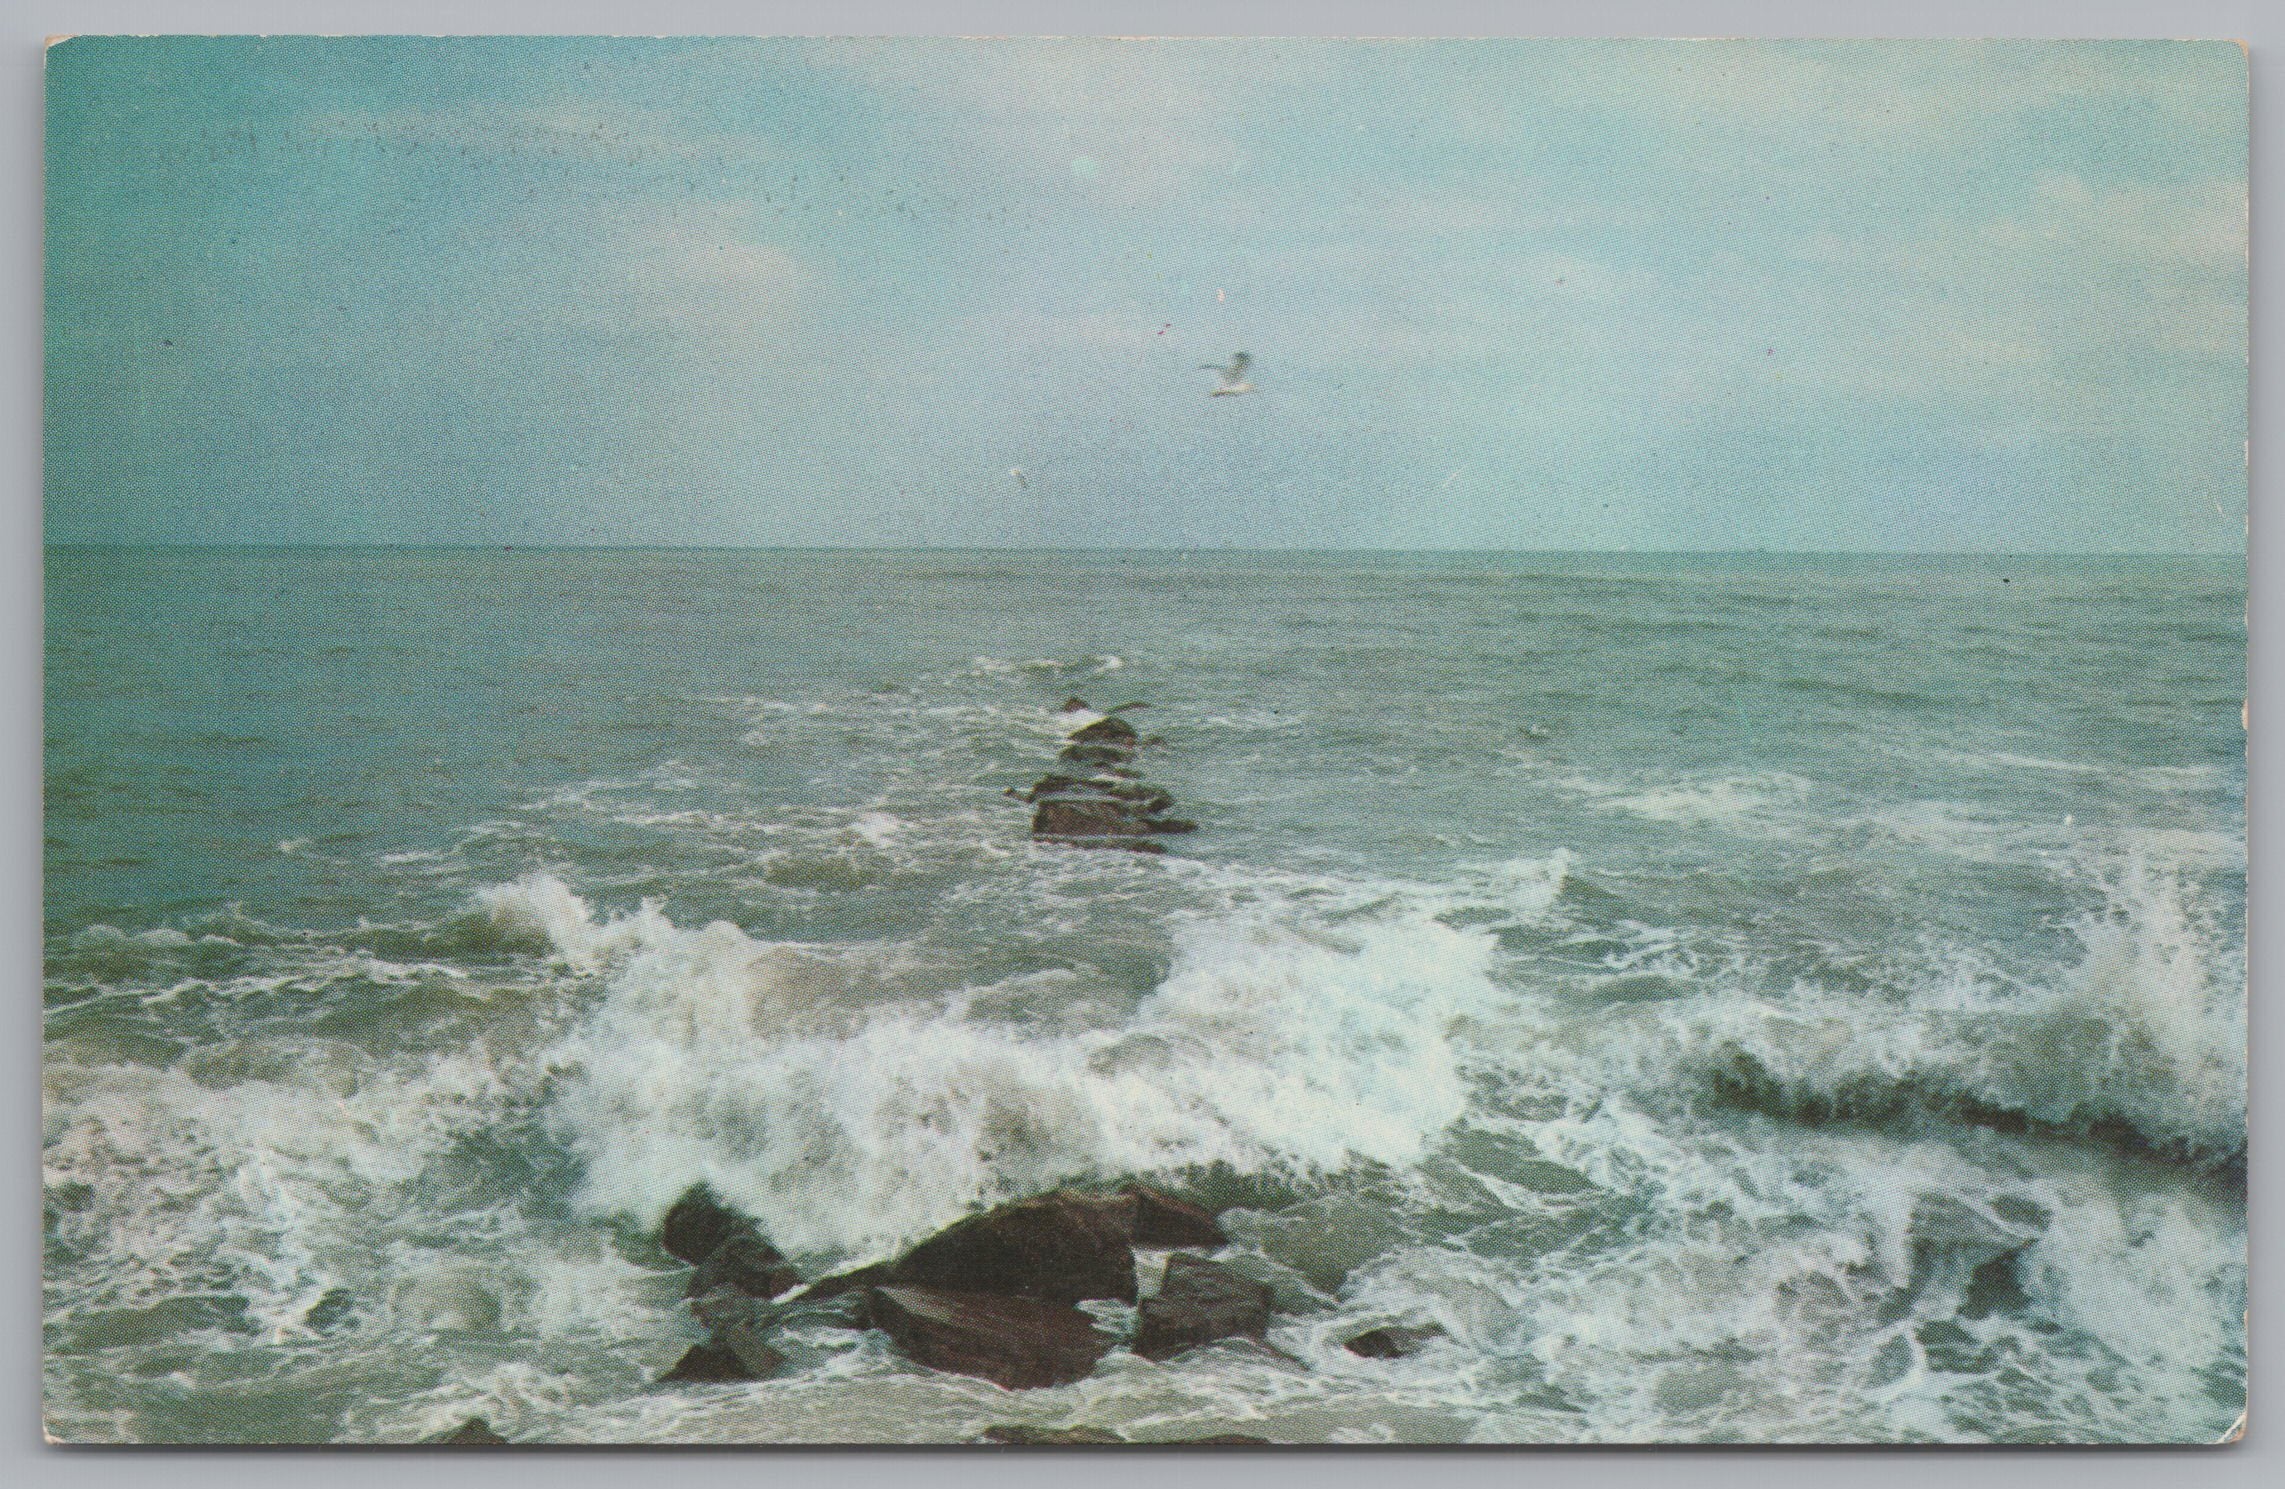 Beautiful Ocean Waters, Seagulls Flying Above, Rocks Above Water Level, Vintage Post Card.